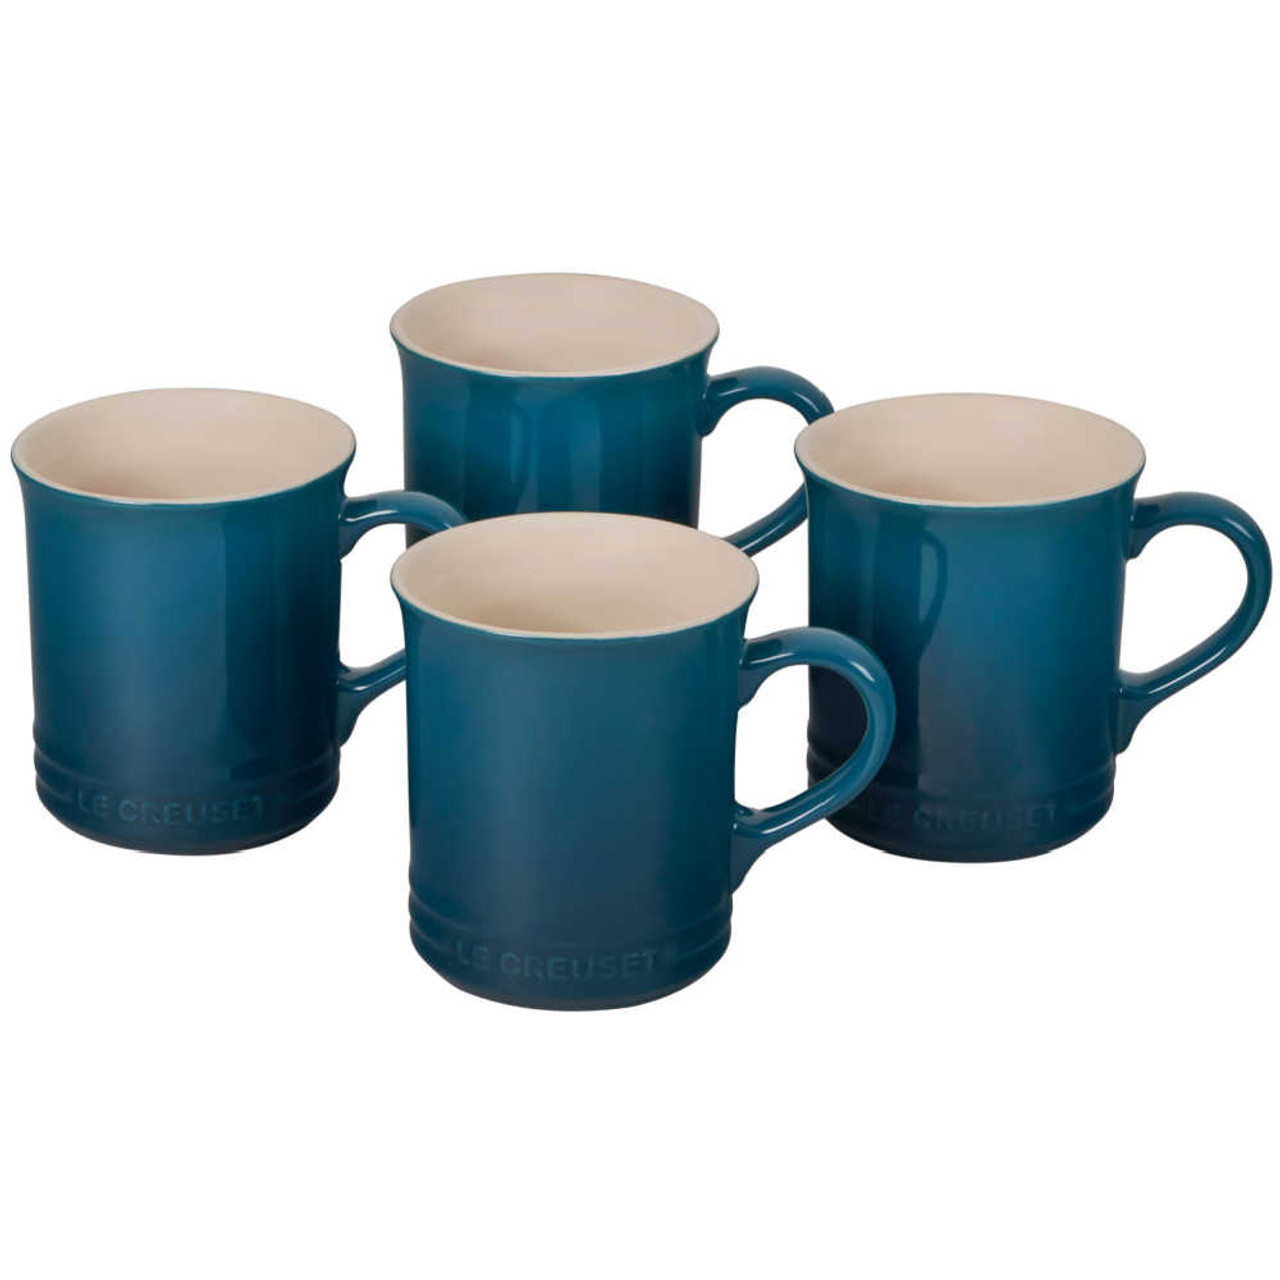 https://cdn11.bigcommerce.com/s-hccytny0od/images/stencil/1280x1280/products/4192/15786/le-creuset-mugs-deep-teal__69825.1628693632.jpg?c=2?imbypass=on